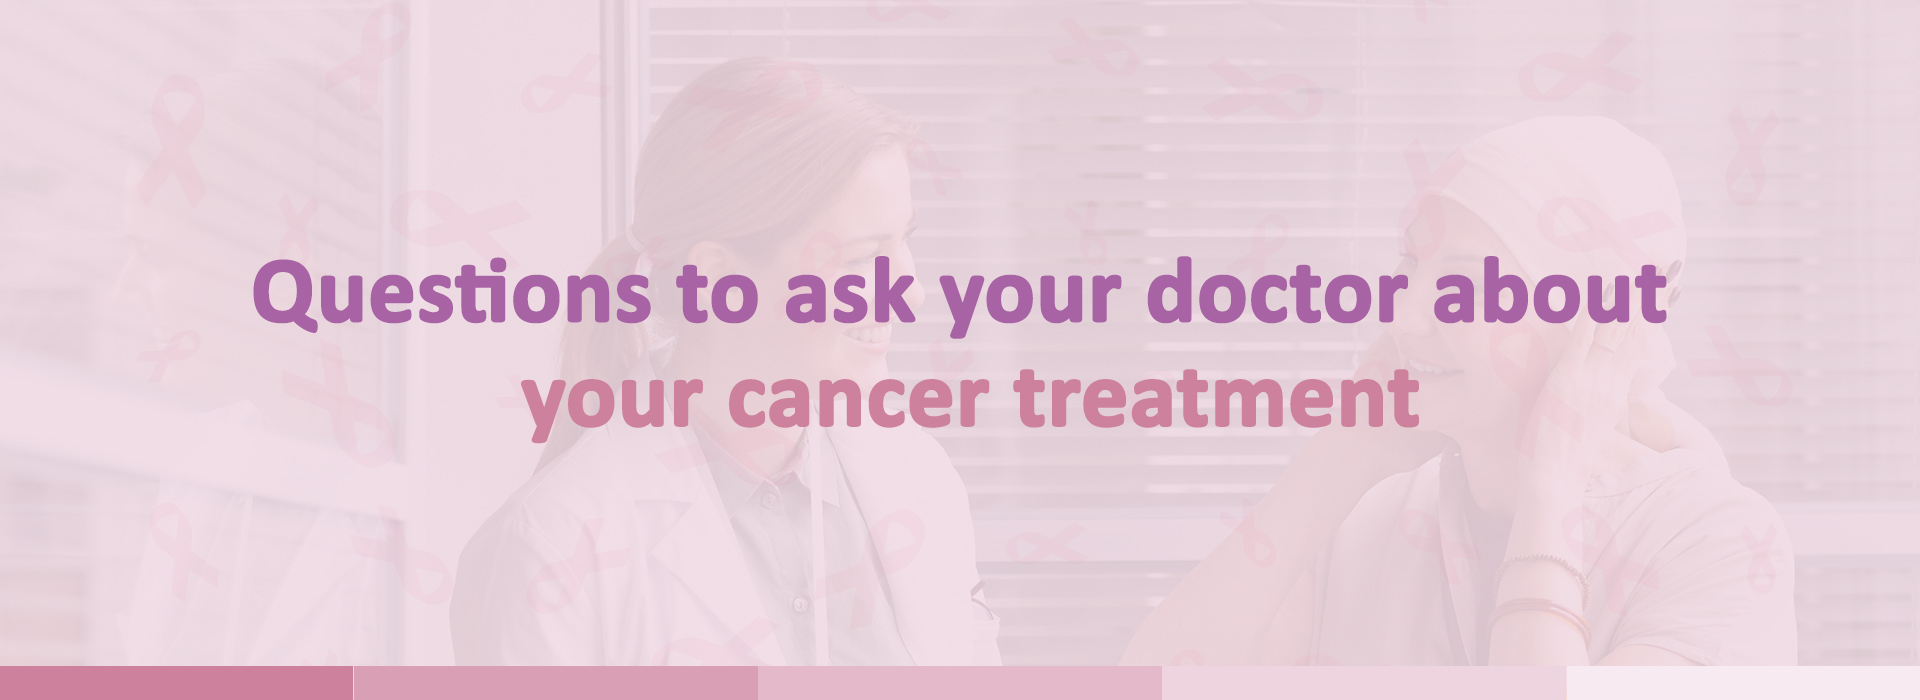 Questions to ask your doctor about your cancer treatment